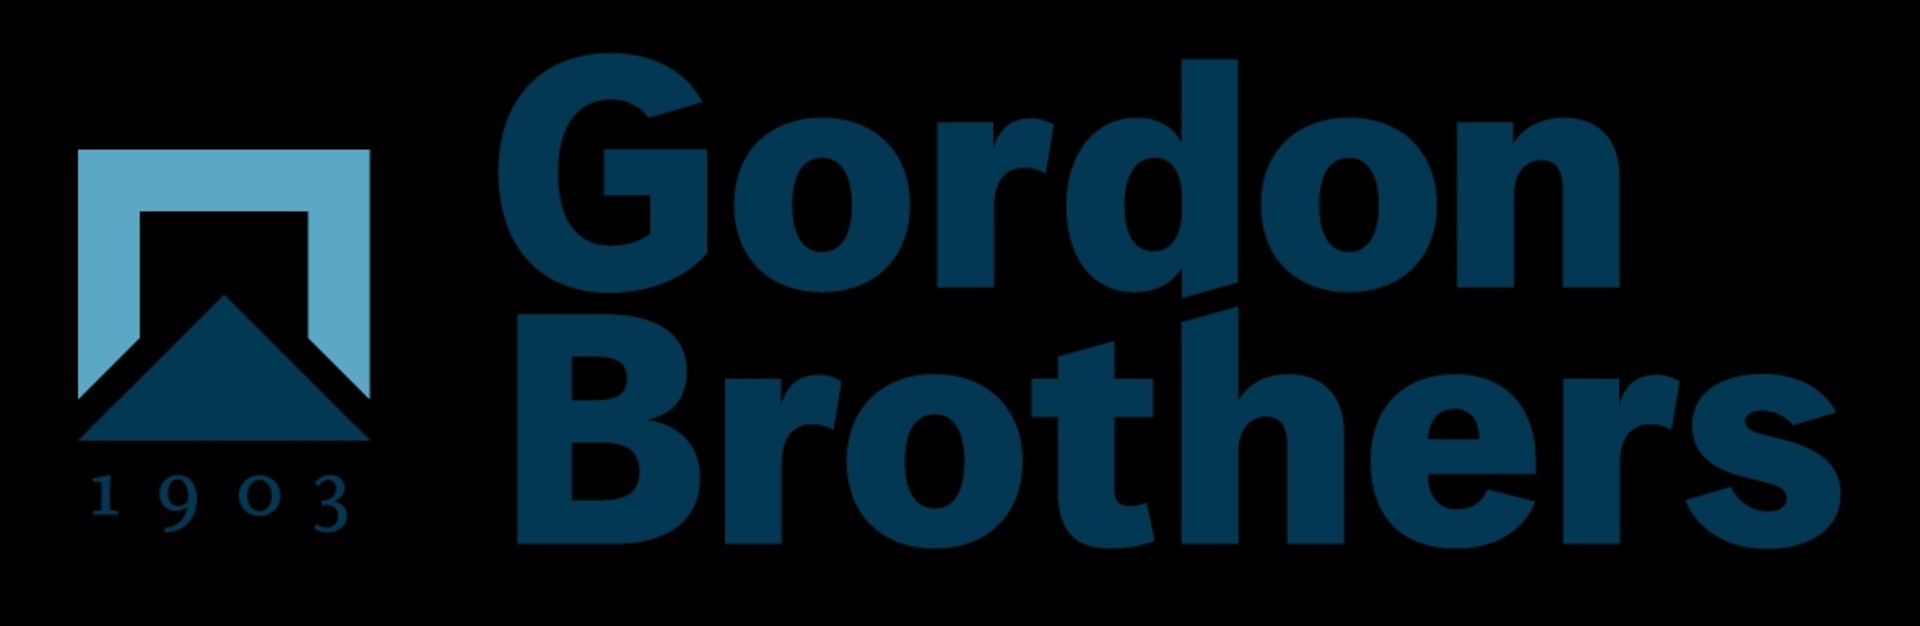 IN CONJUNCTION WITH GORDON BROTHERS